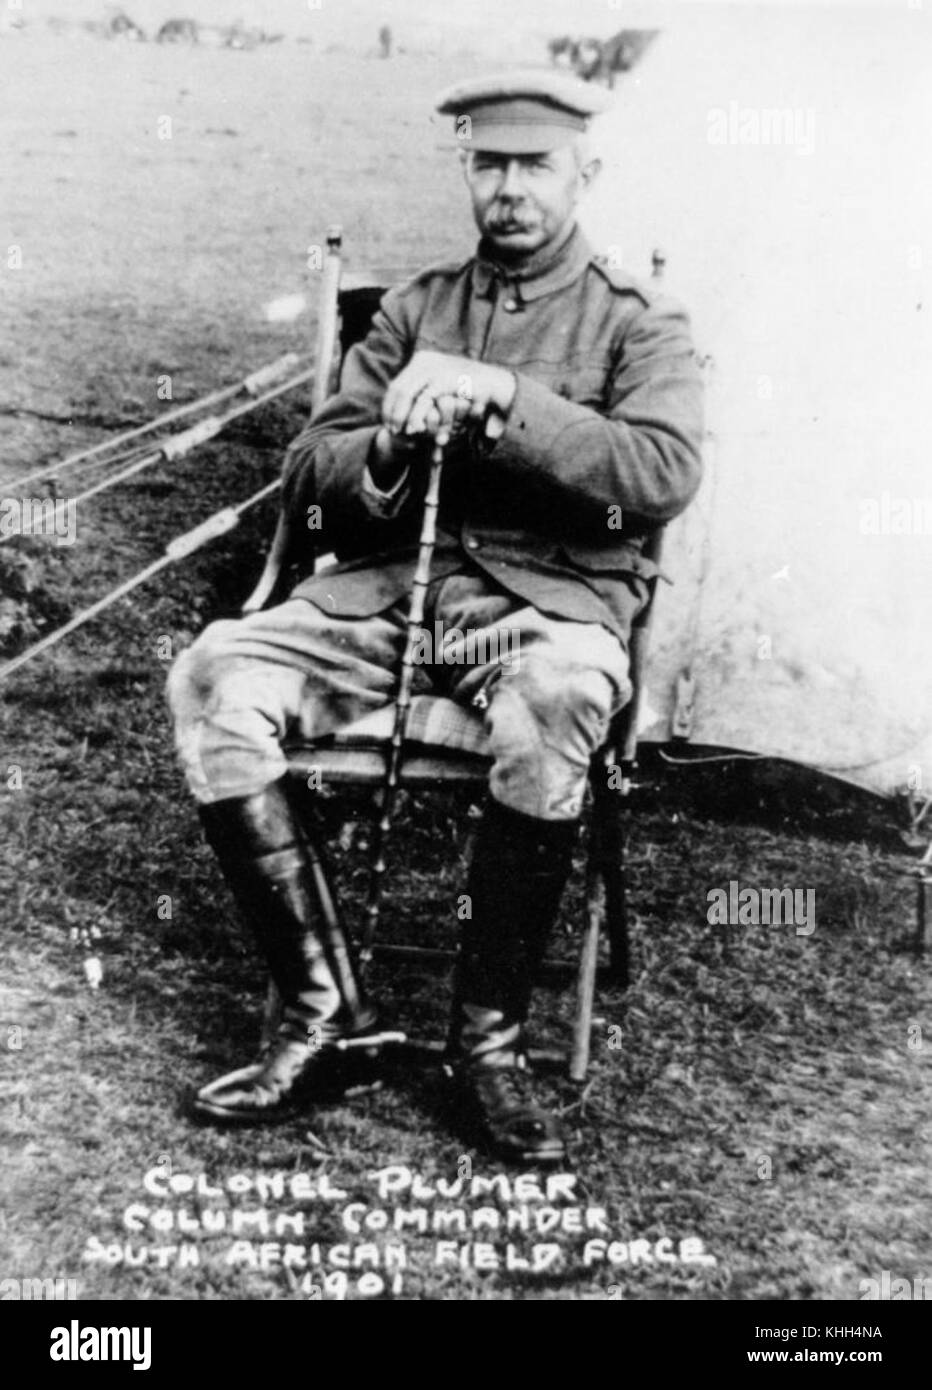 2 187251 Colonel Plumer, South African Field Force, 1901 Stock Photo